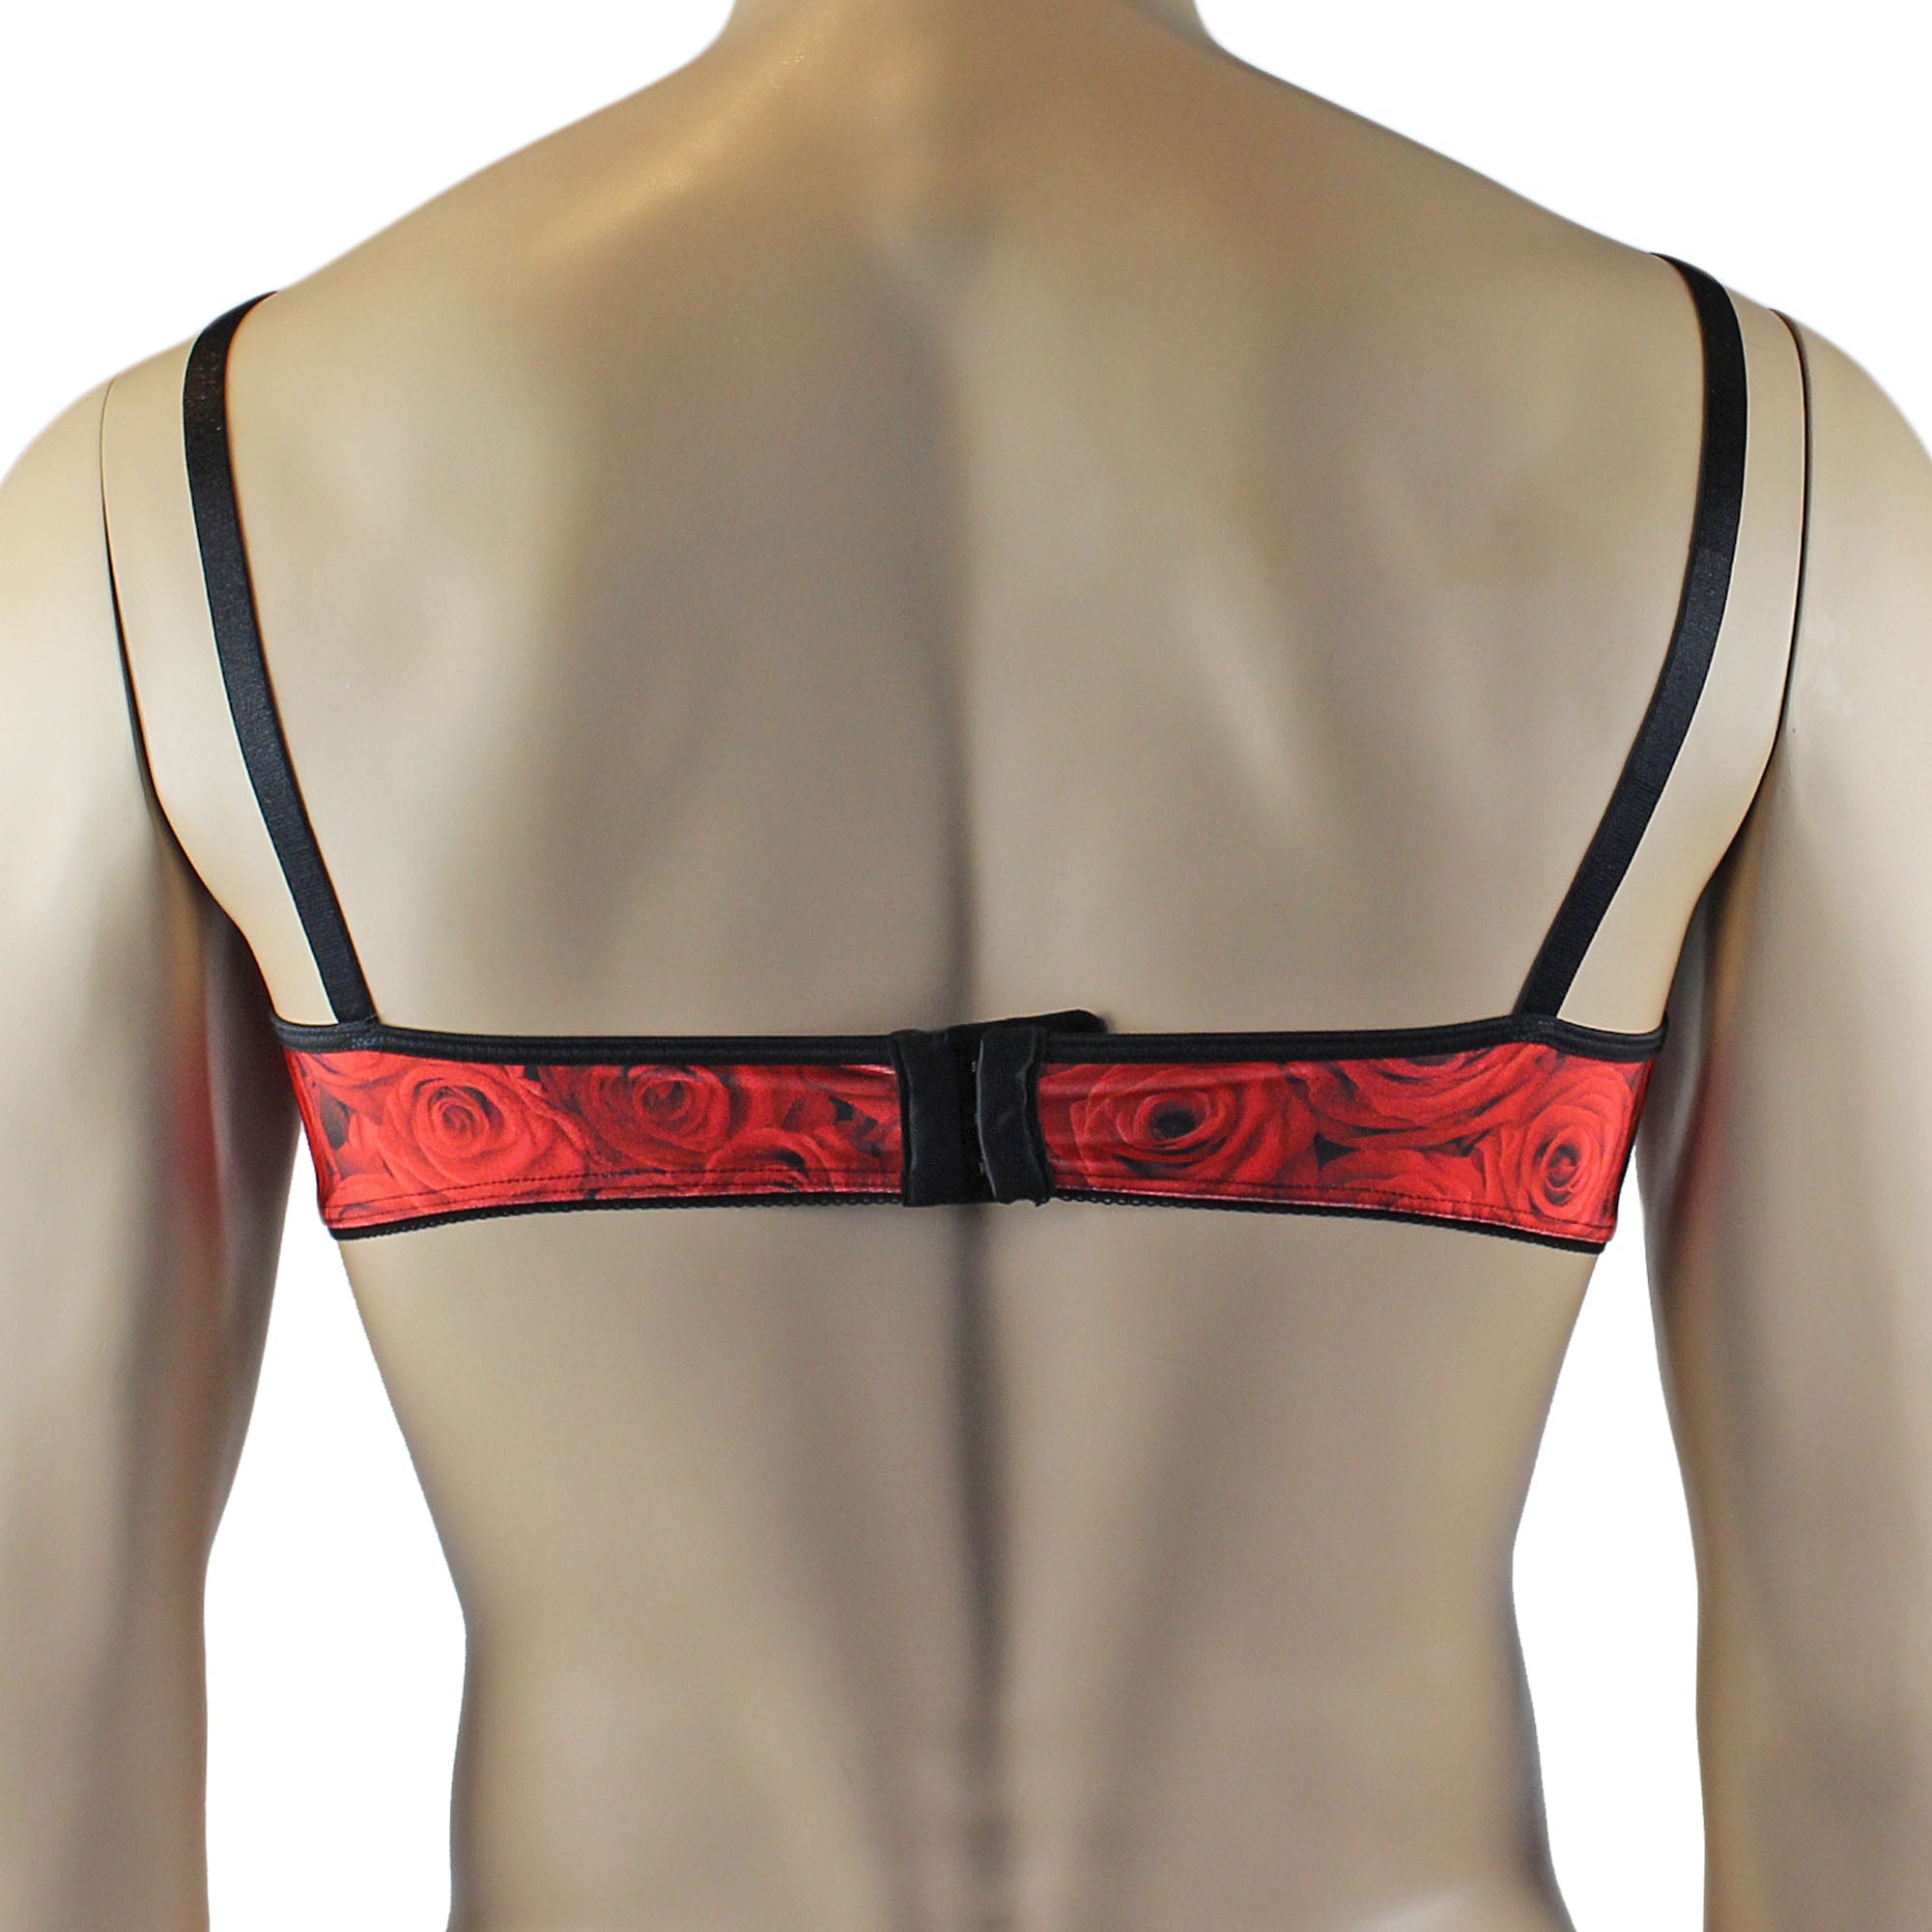 Mens Roses Spandex Bra Top with Frilled Pico Elastic Trim Male Lingerie Red